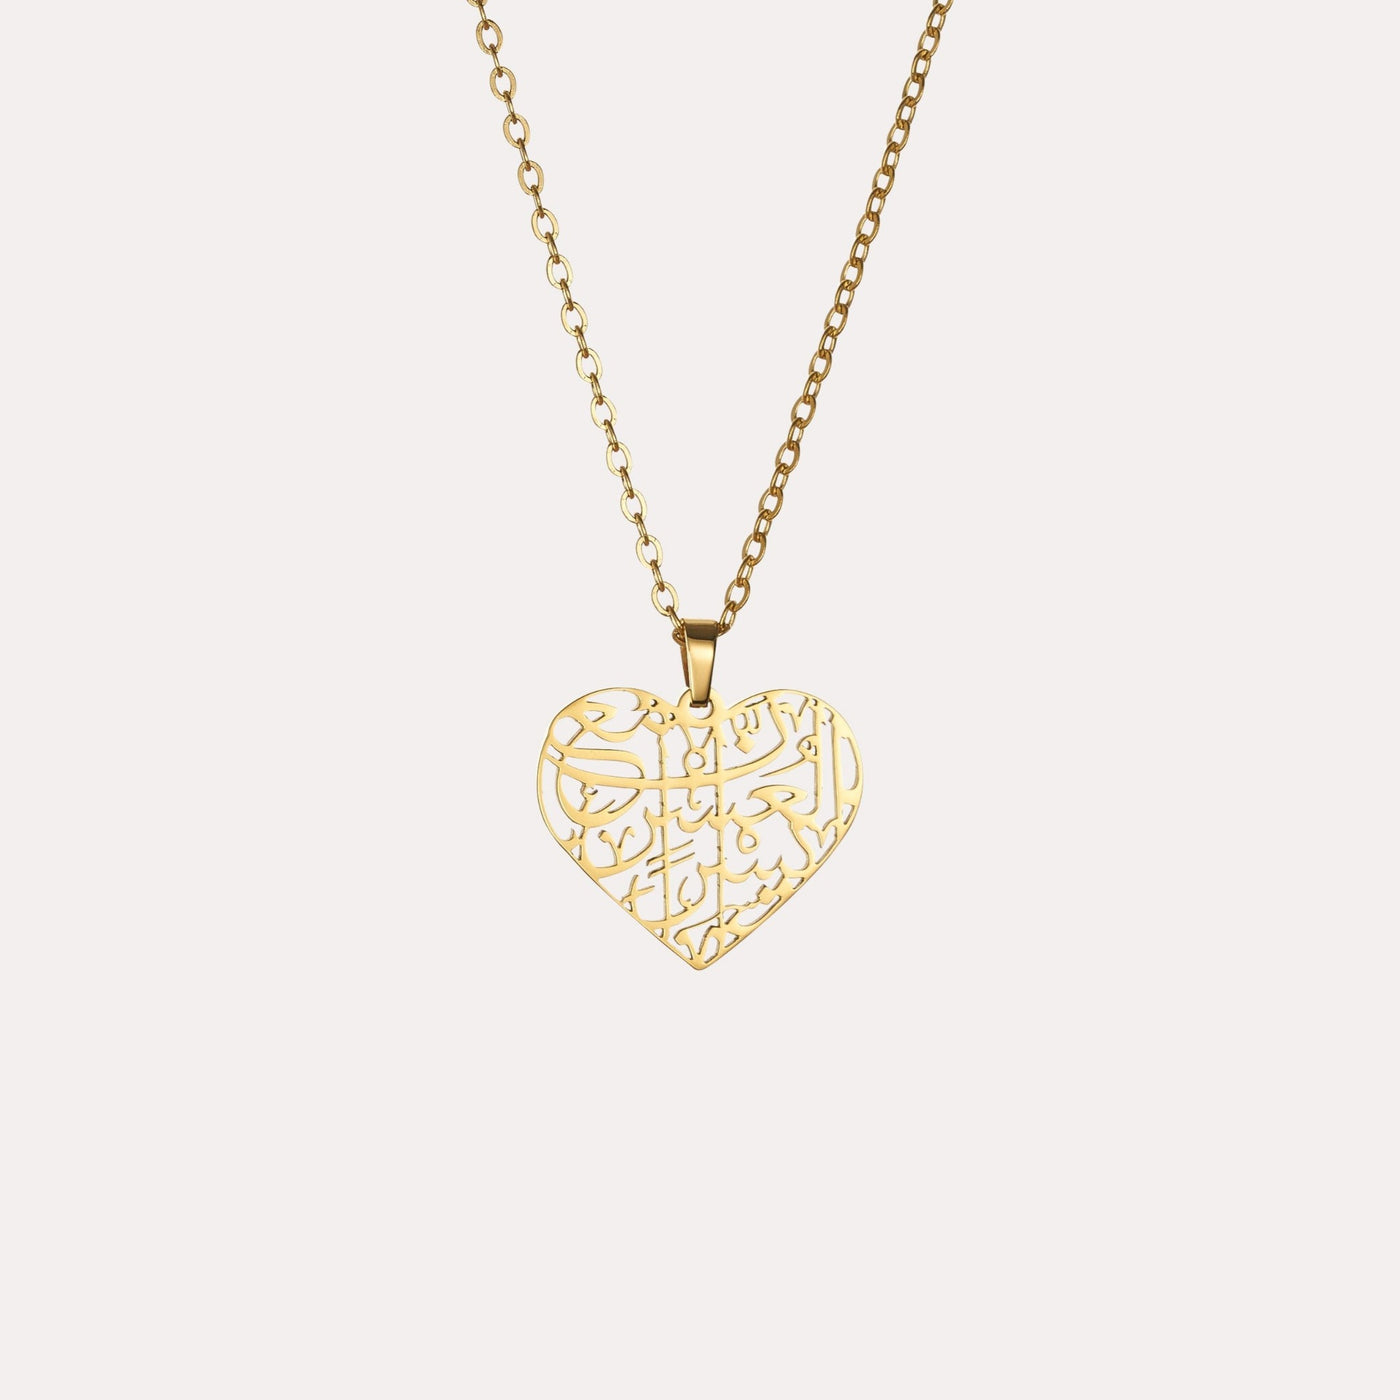 VWEHCE Heart Shaped | Calligraphy Necklace